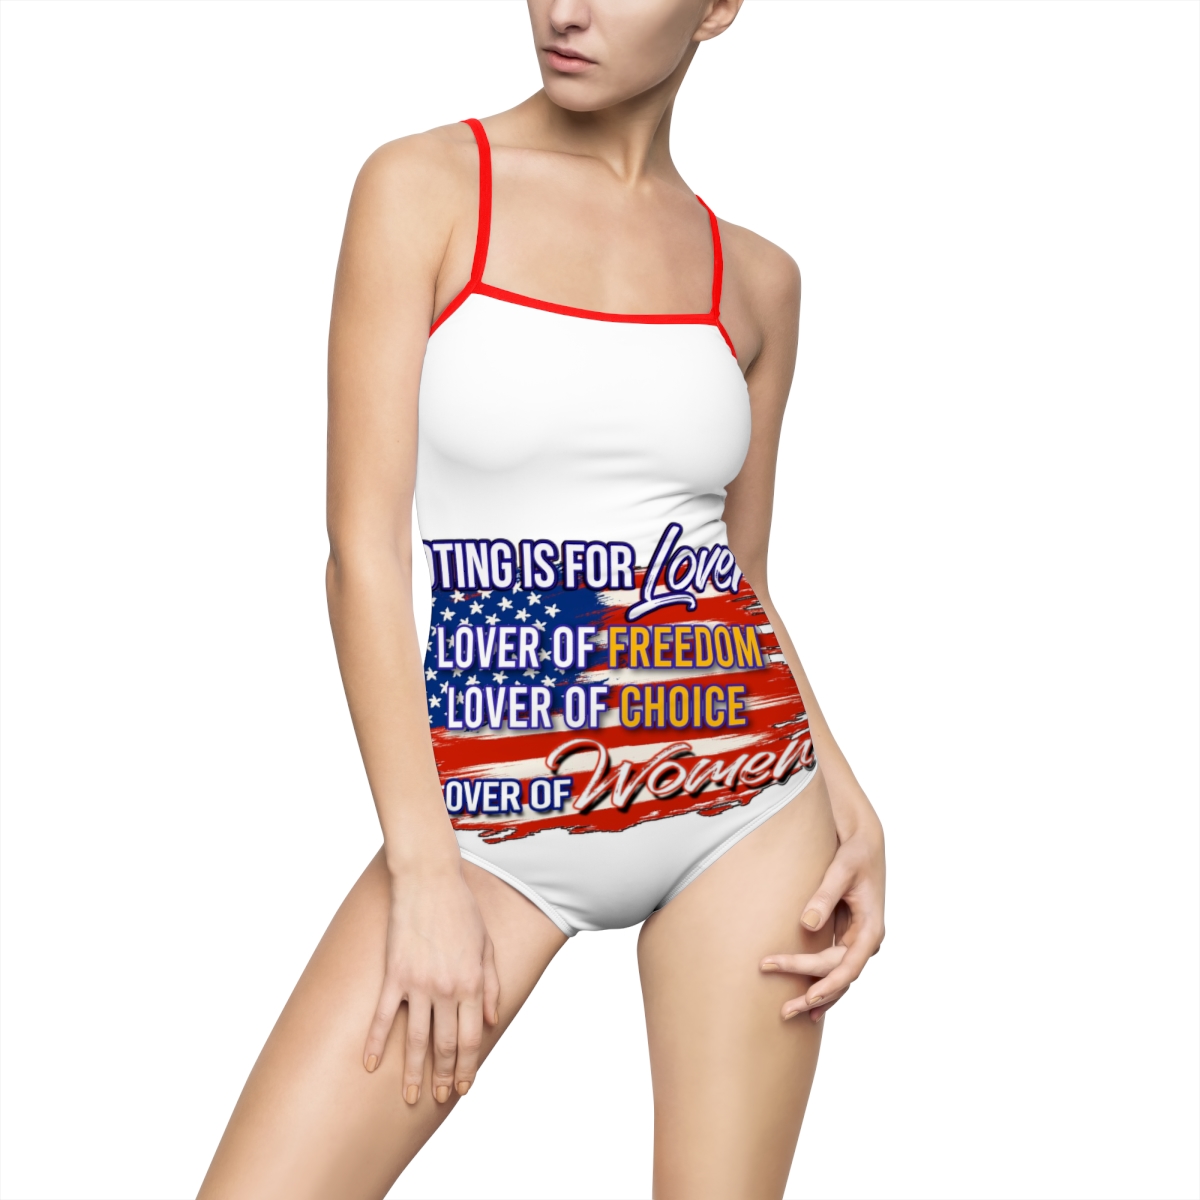 Lover of Women Women's One-piece Swimsuit (AOP) product thumbnail image